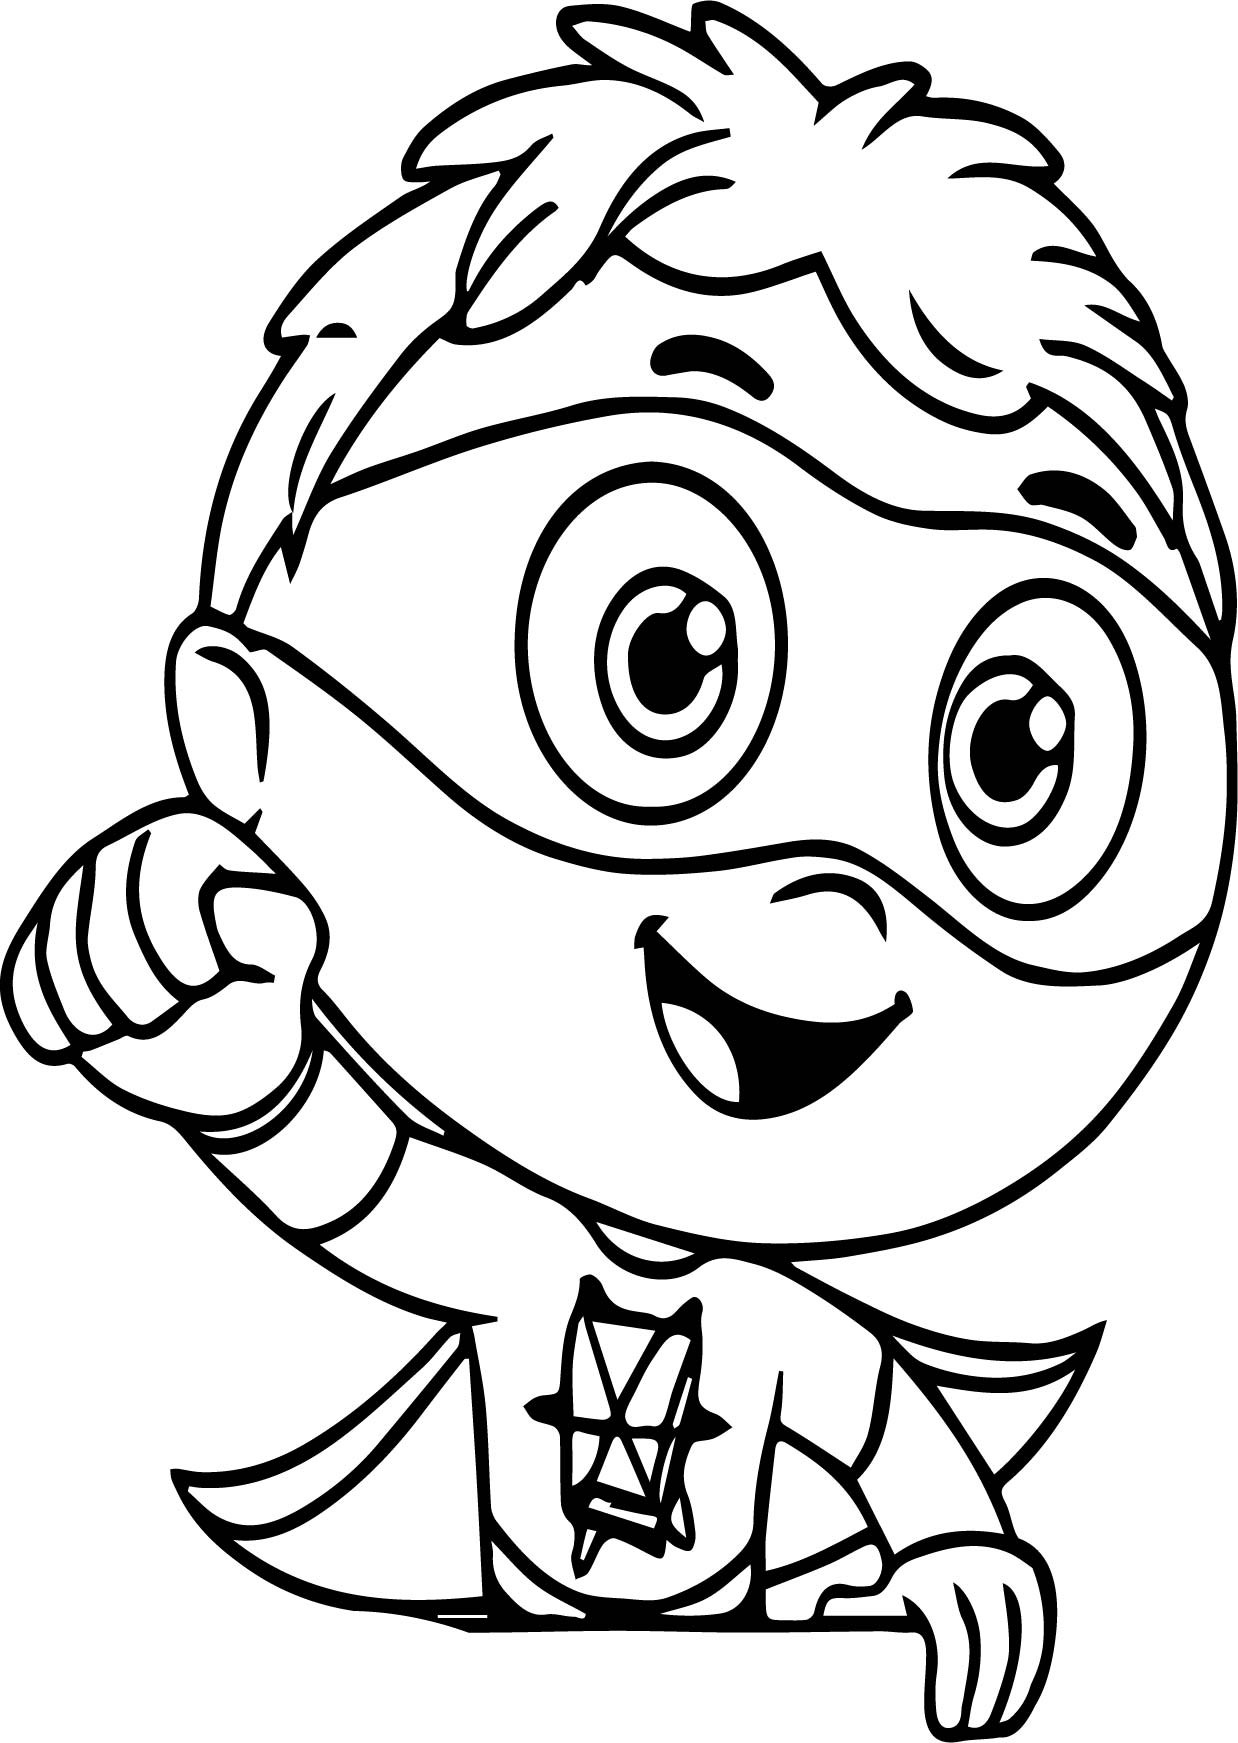 Download Coloring Pages For Kids
 Super Why Coloring Pages Best Coloring Pages For Kids